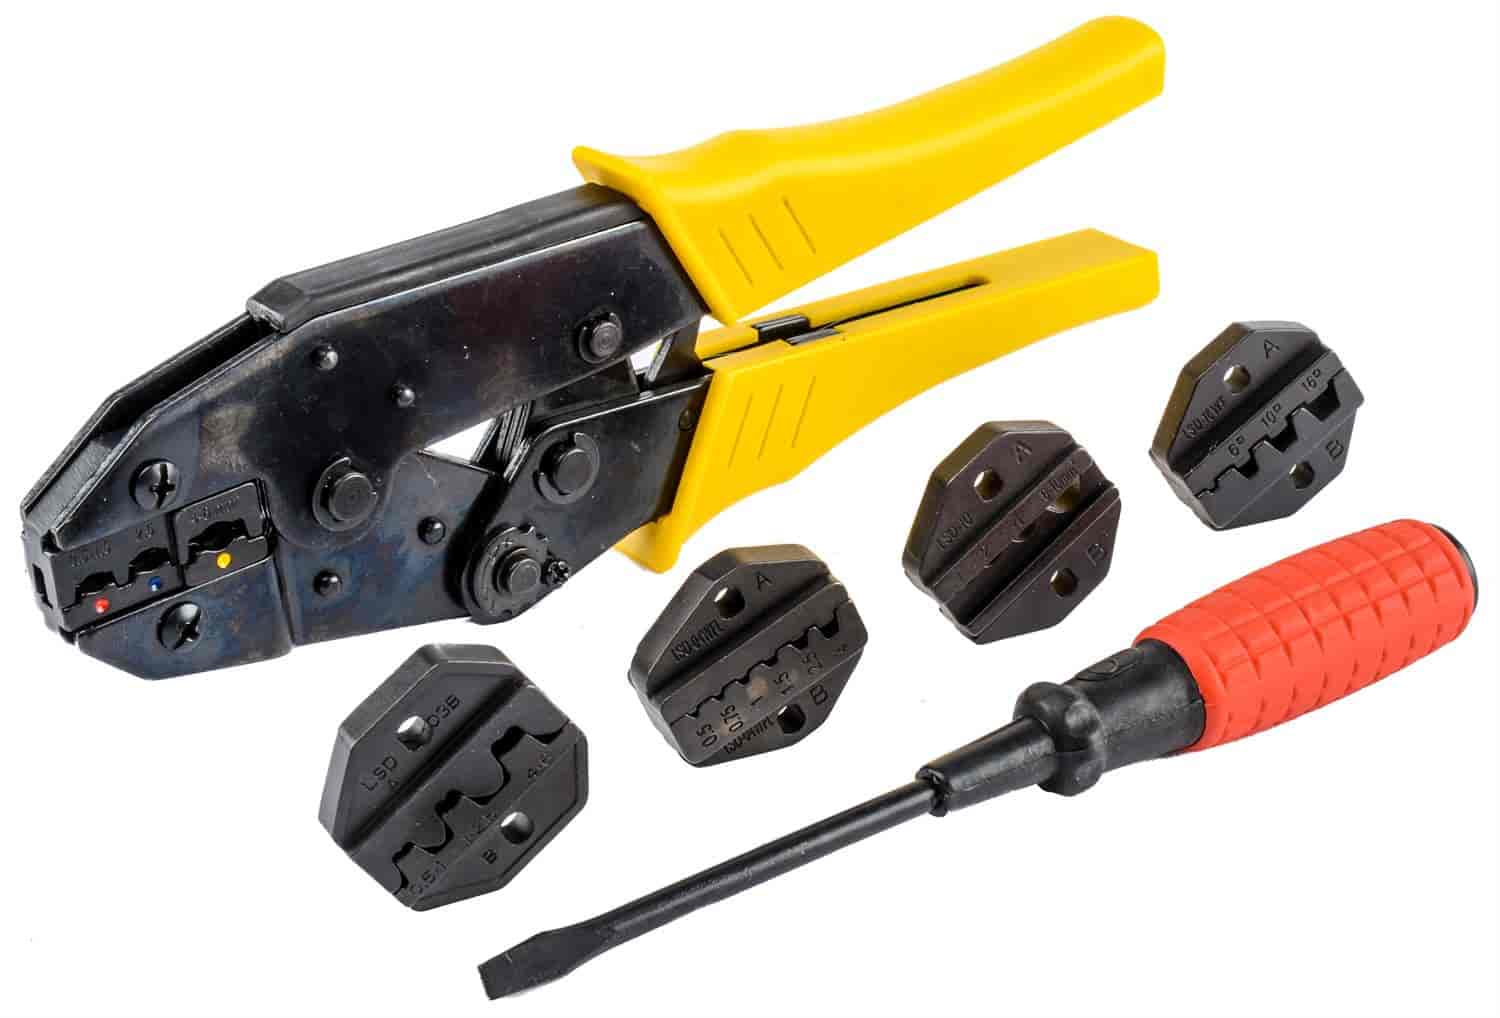 JEGS 80570 Spark Plug Wire Crimping Tool for 7 mm to 9 mm Wires